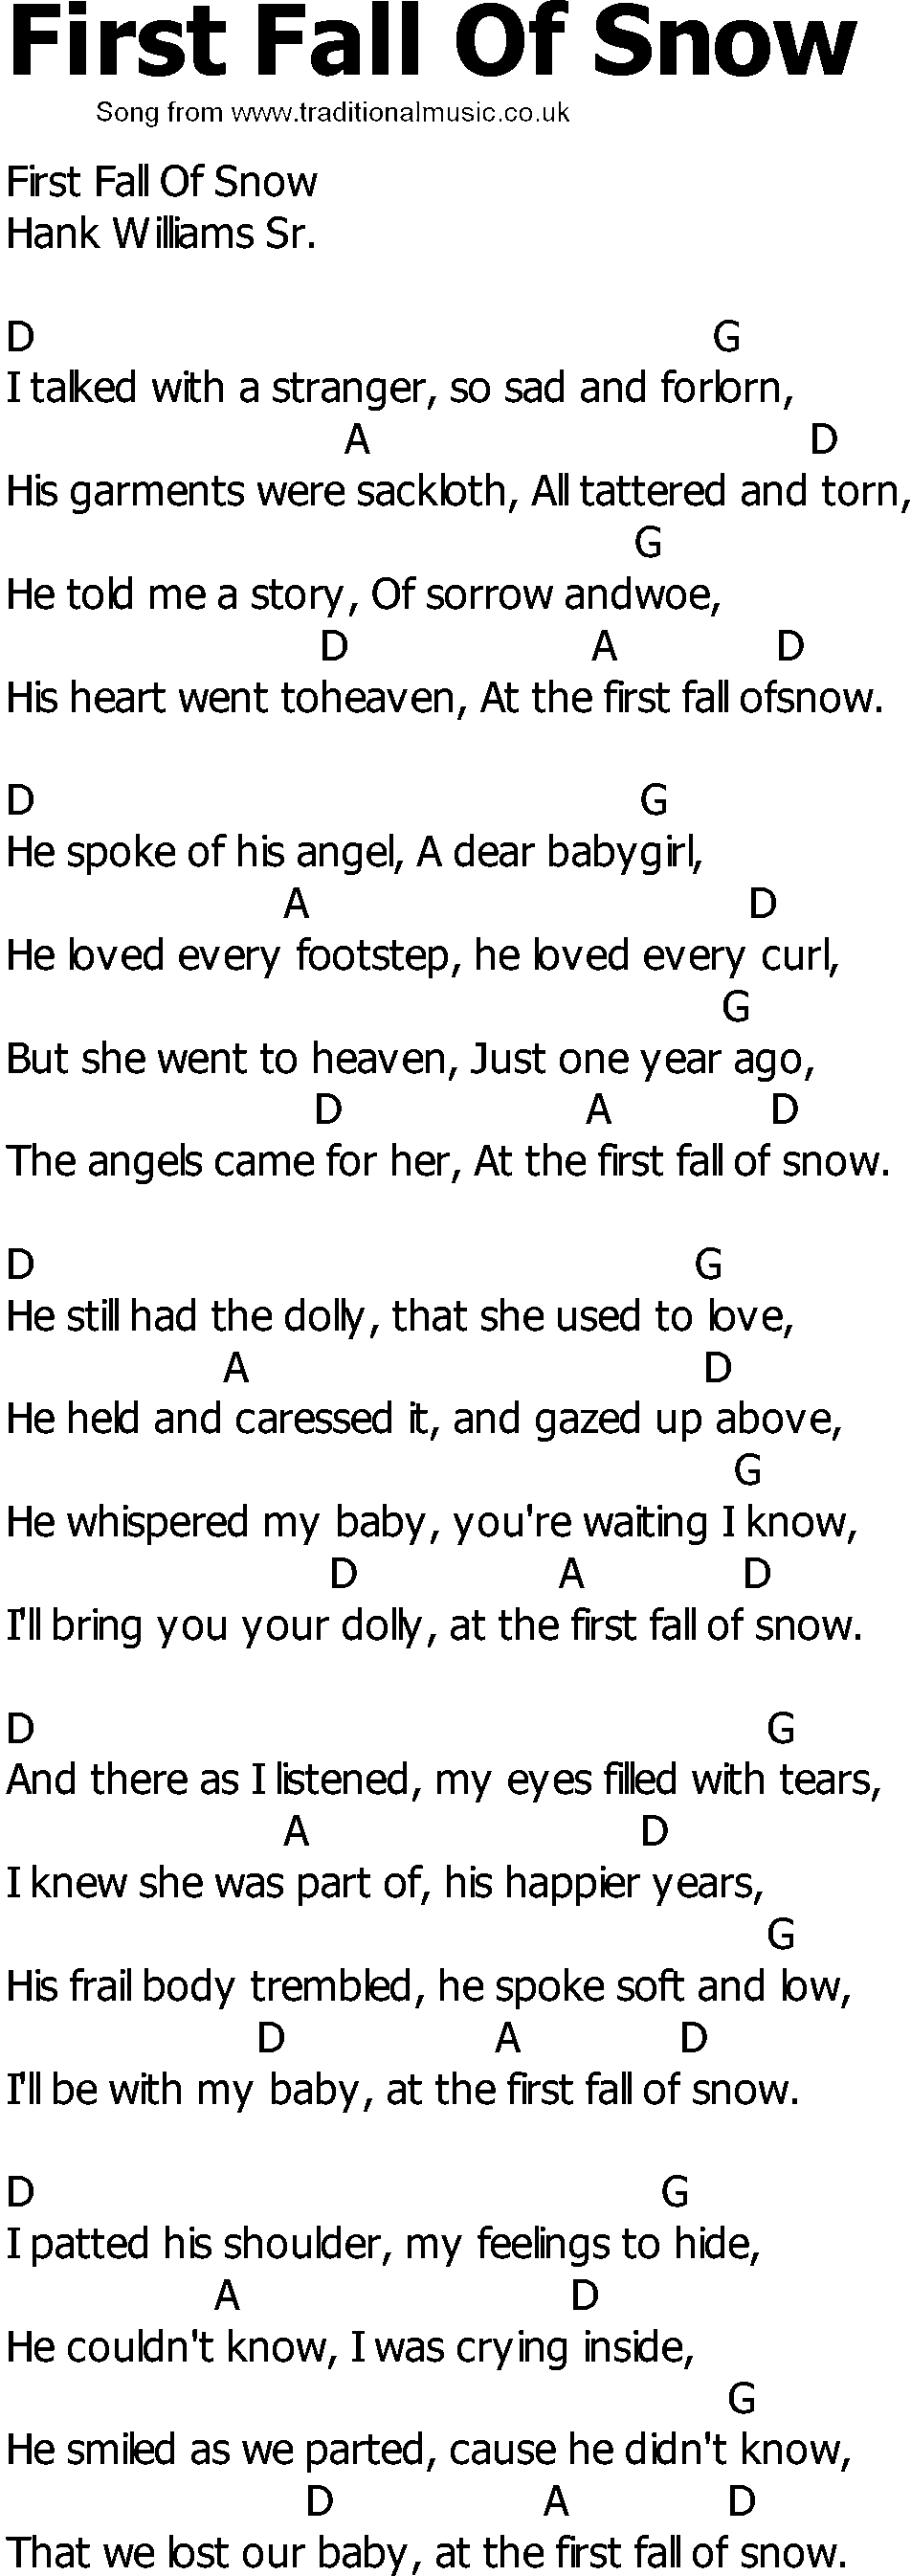 Old Country song lyrics with chords - First Fall Of Snow